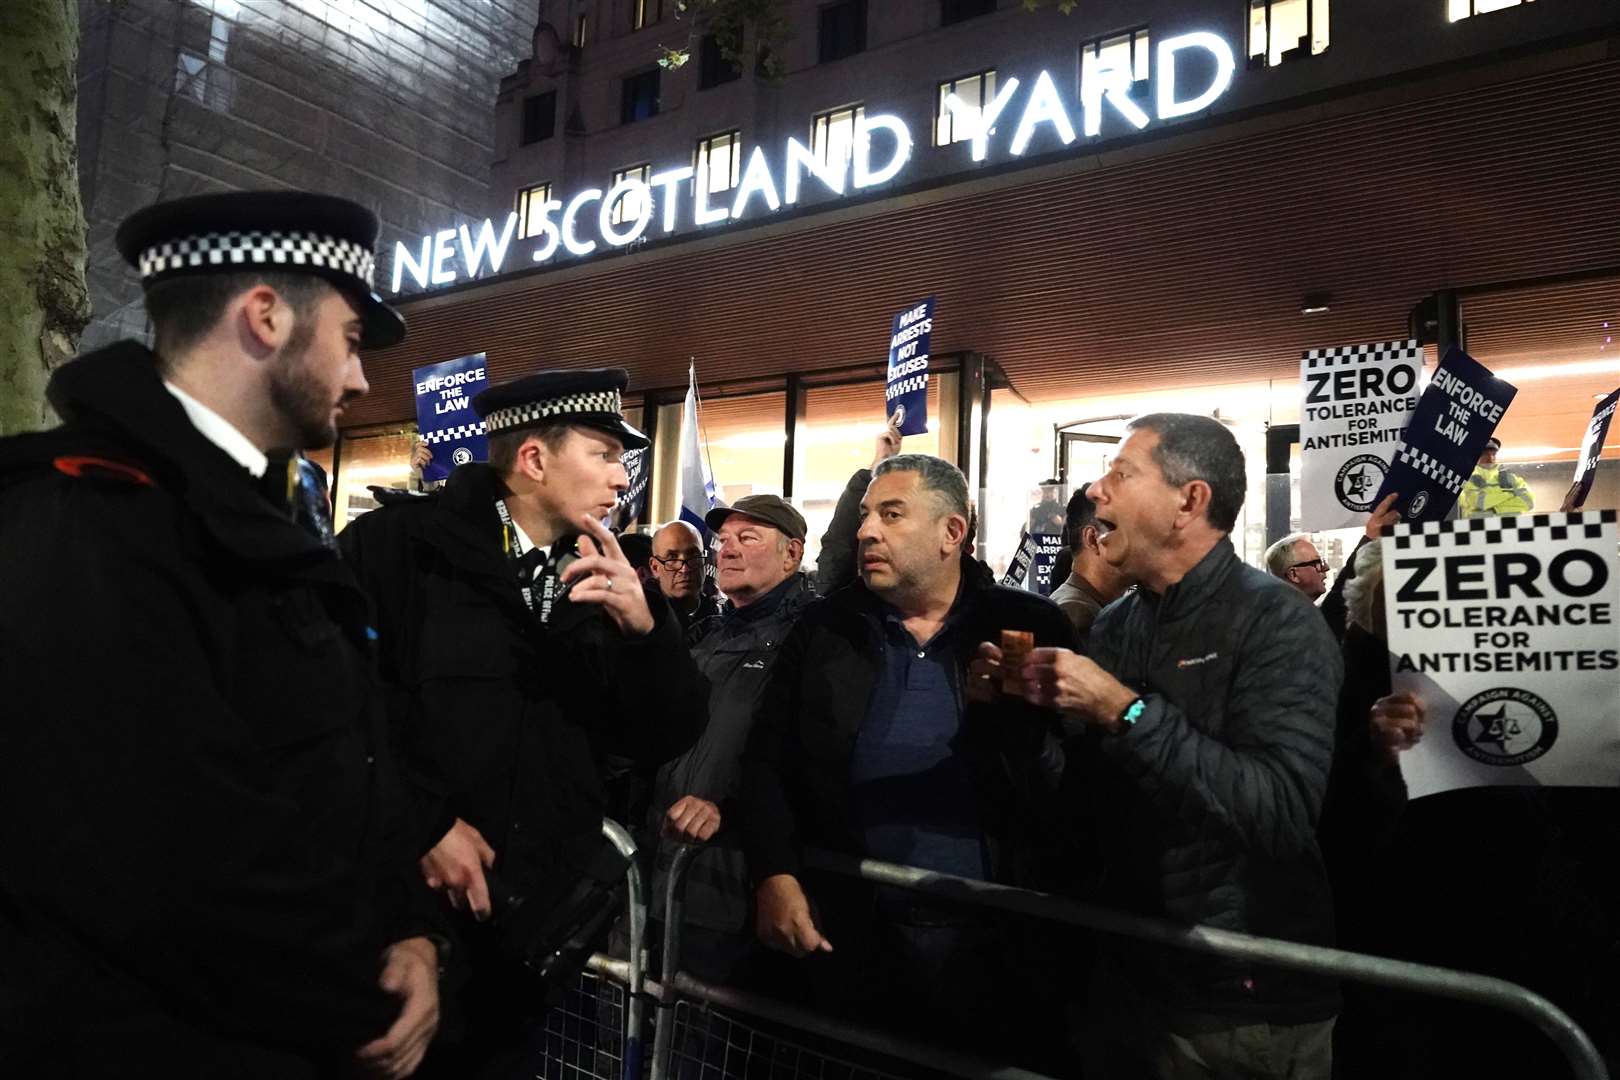 Police officers talking to protesters during the rally (Jordan Pettitt/PA)